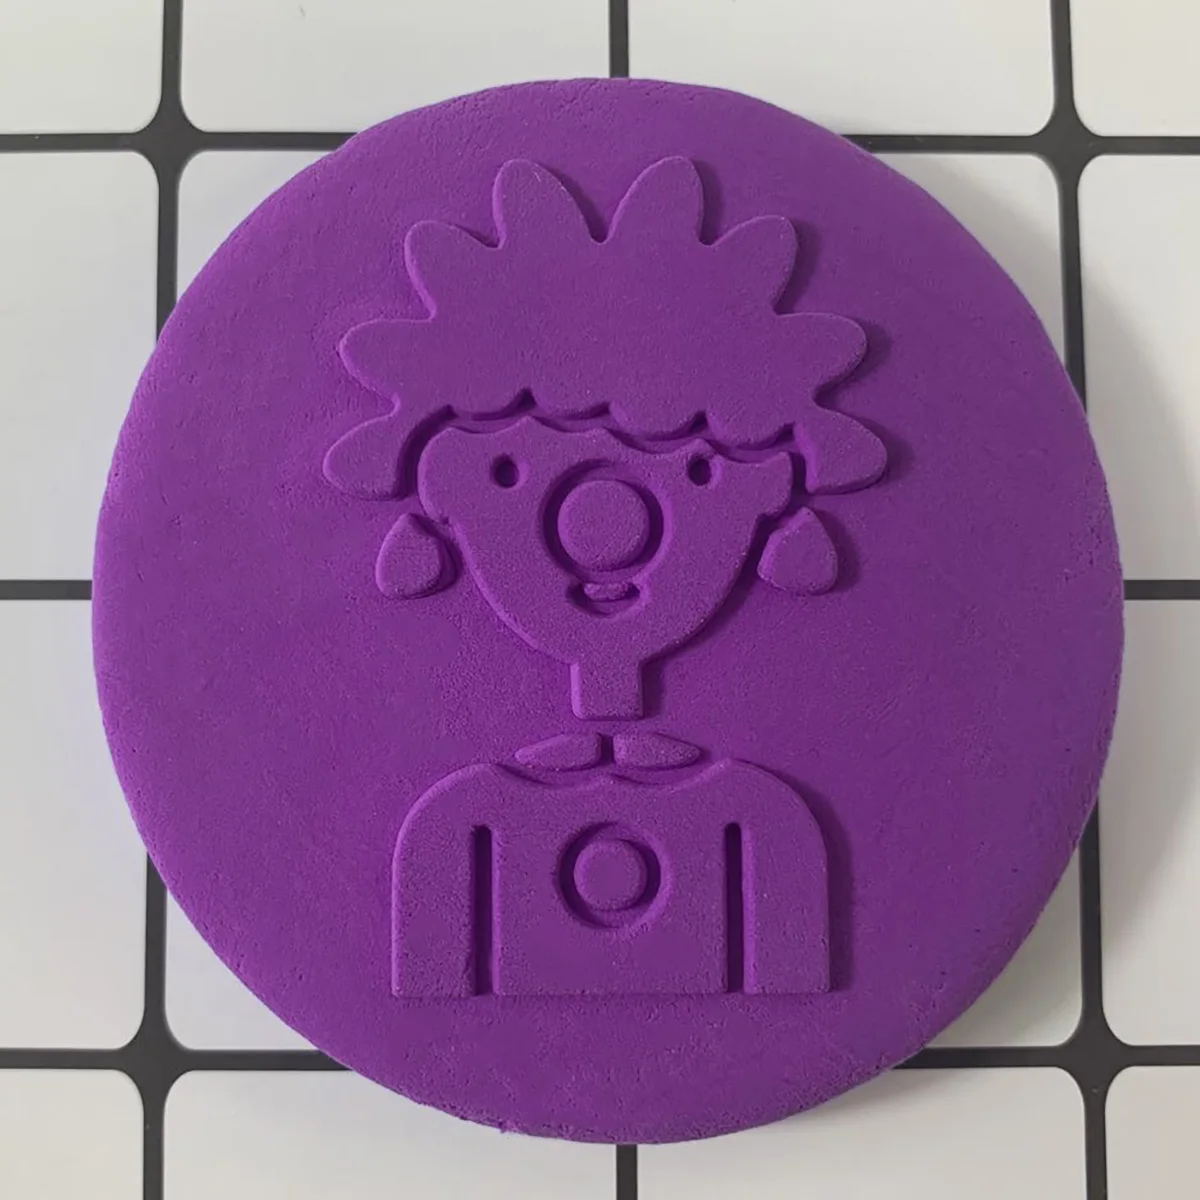 

Clown Bachelor Cookie stamp Acrylic seal Deluxe Stamp Relief Stamper Cookie mould Stereoscopic pattern Mold custom